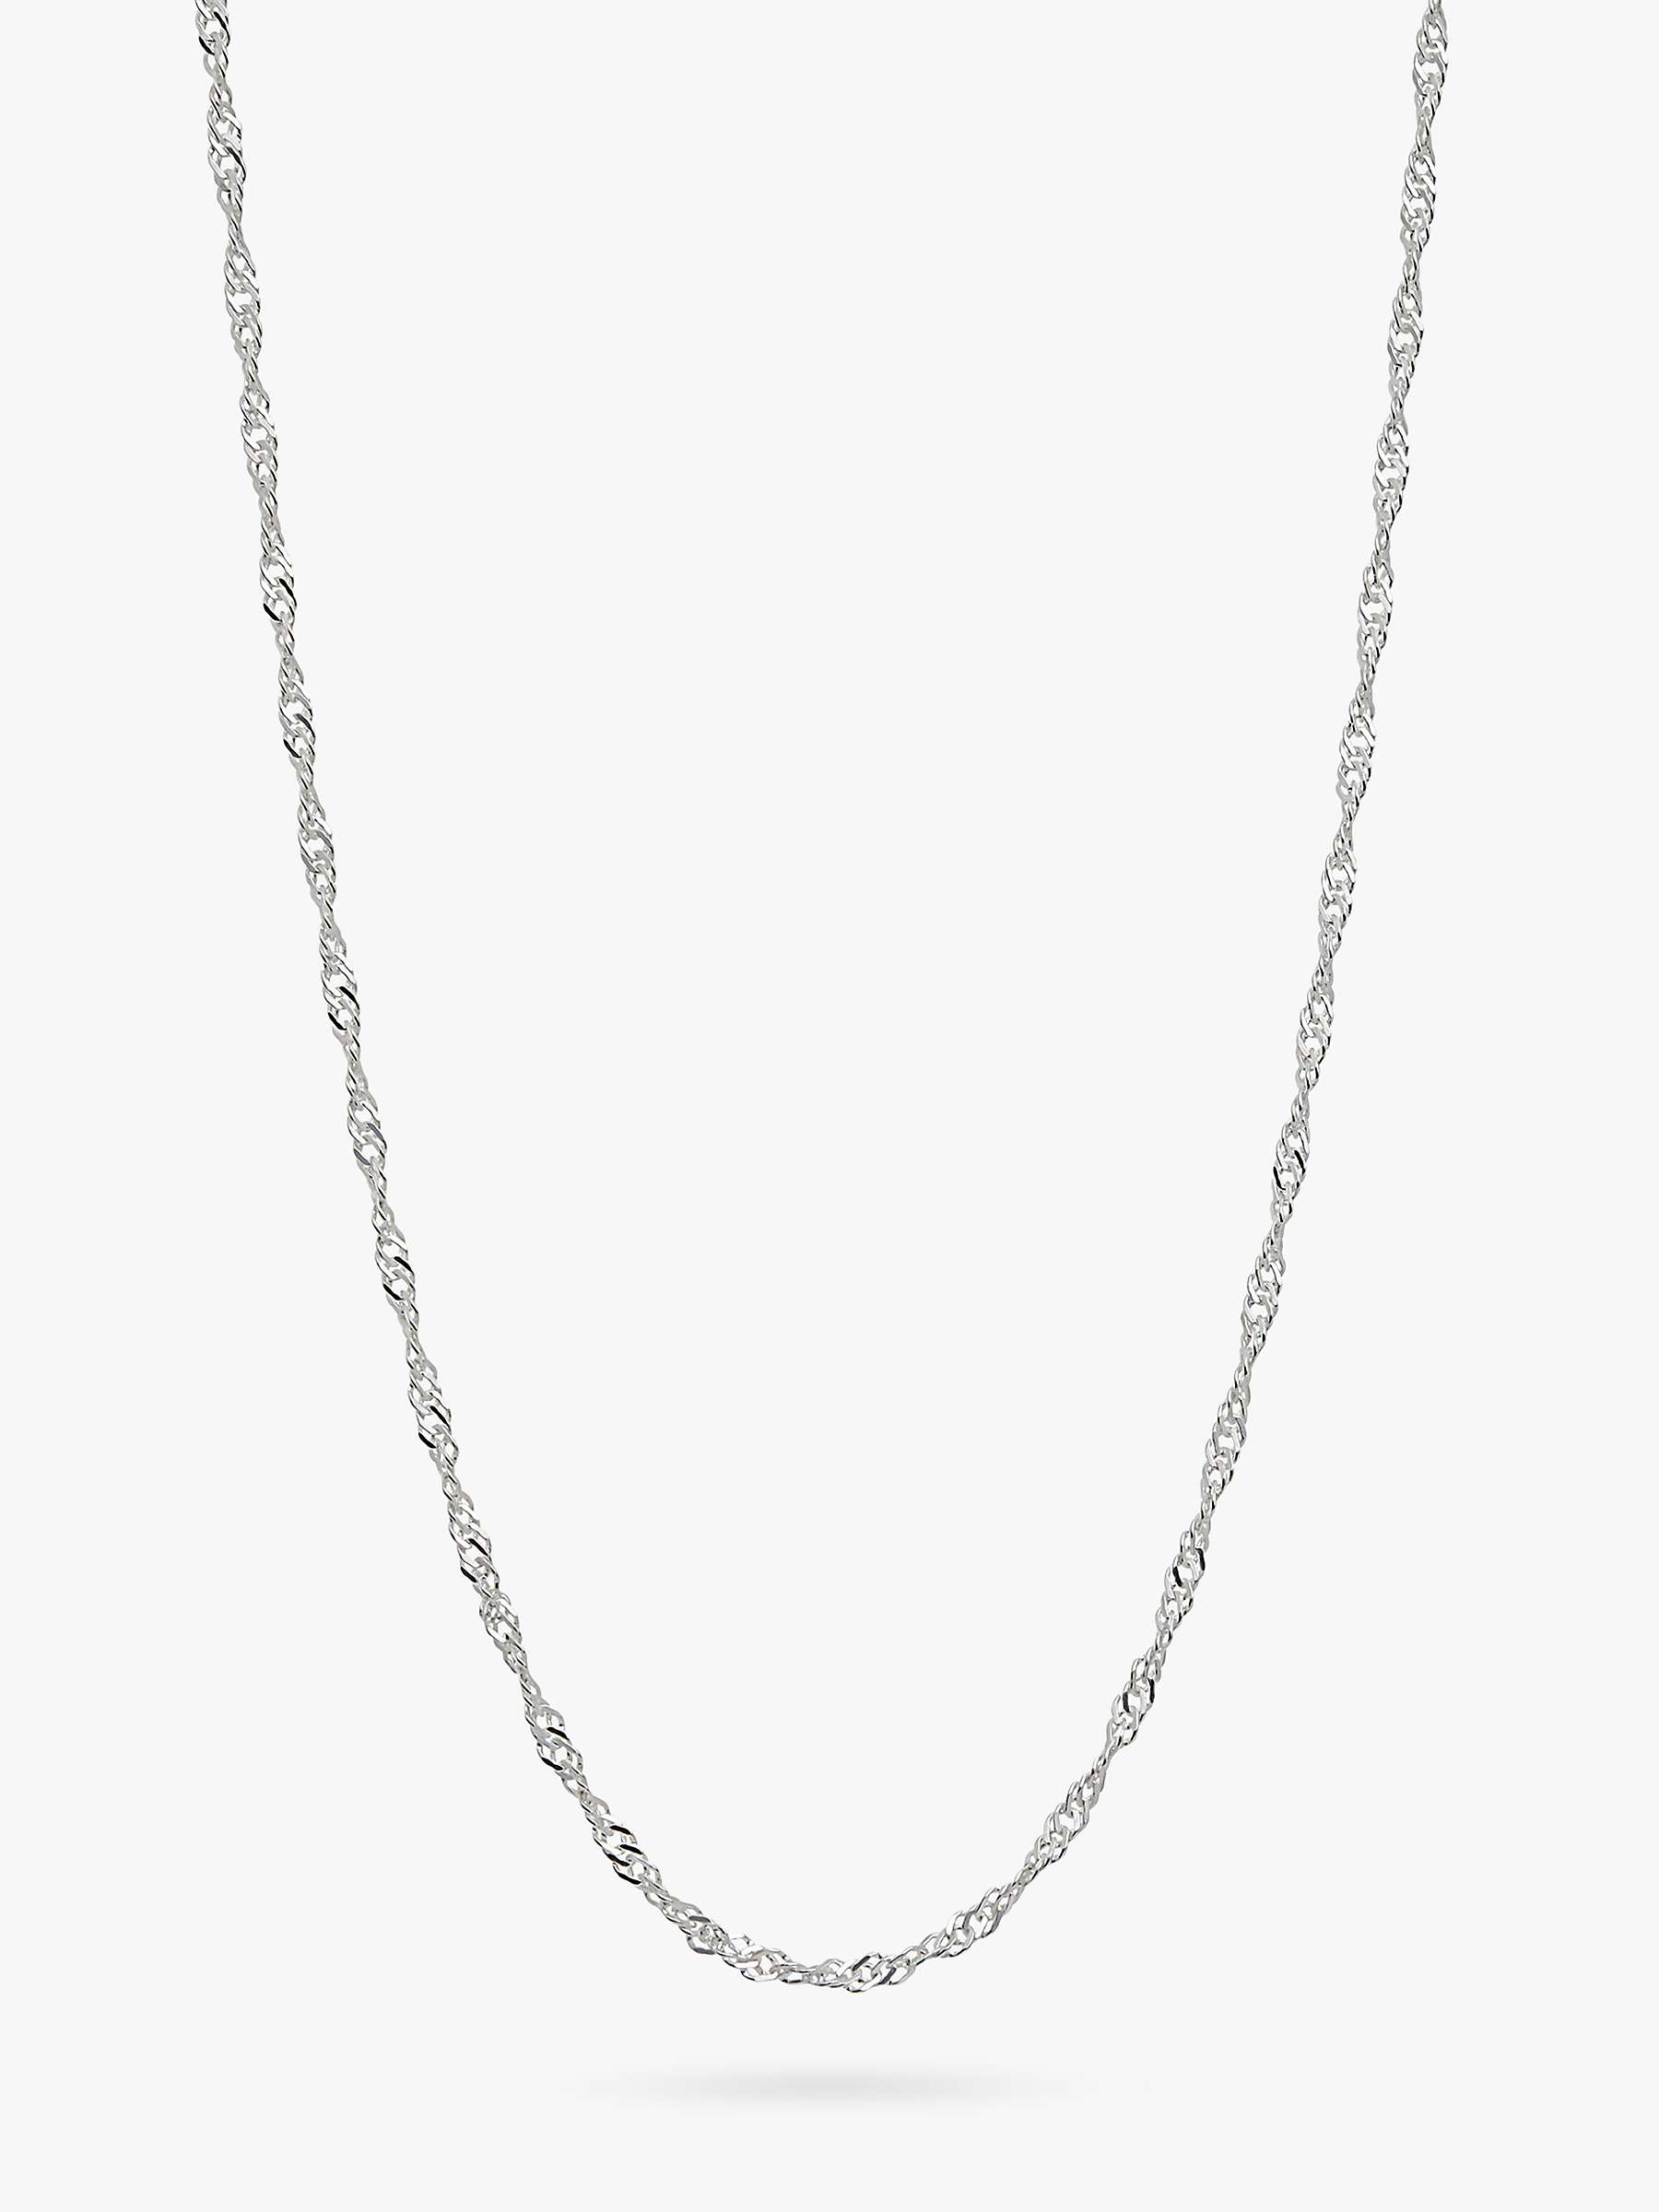 Buy Simply Silver Singapore Chain Necklace, Silver Online at johnlewis.com